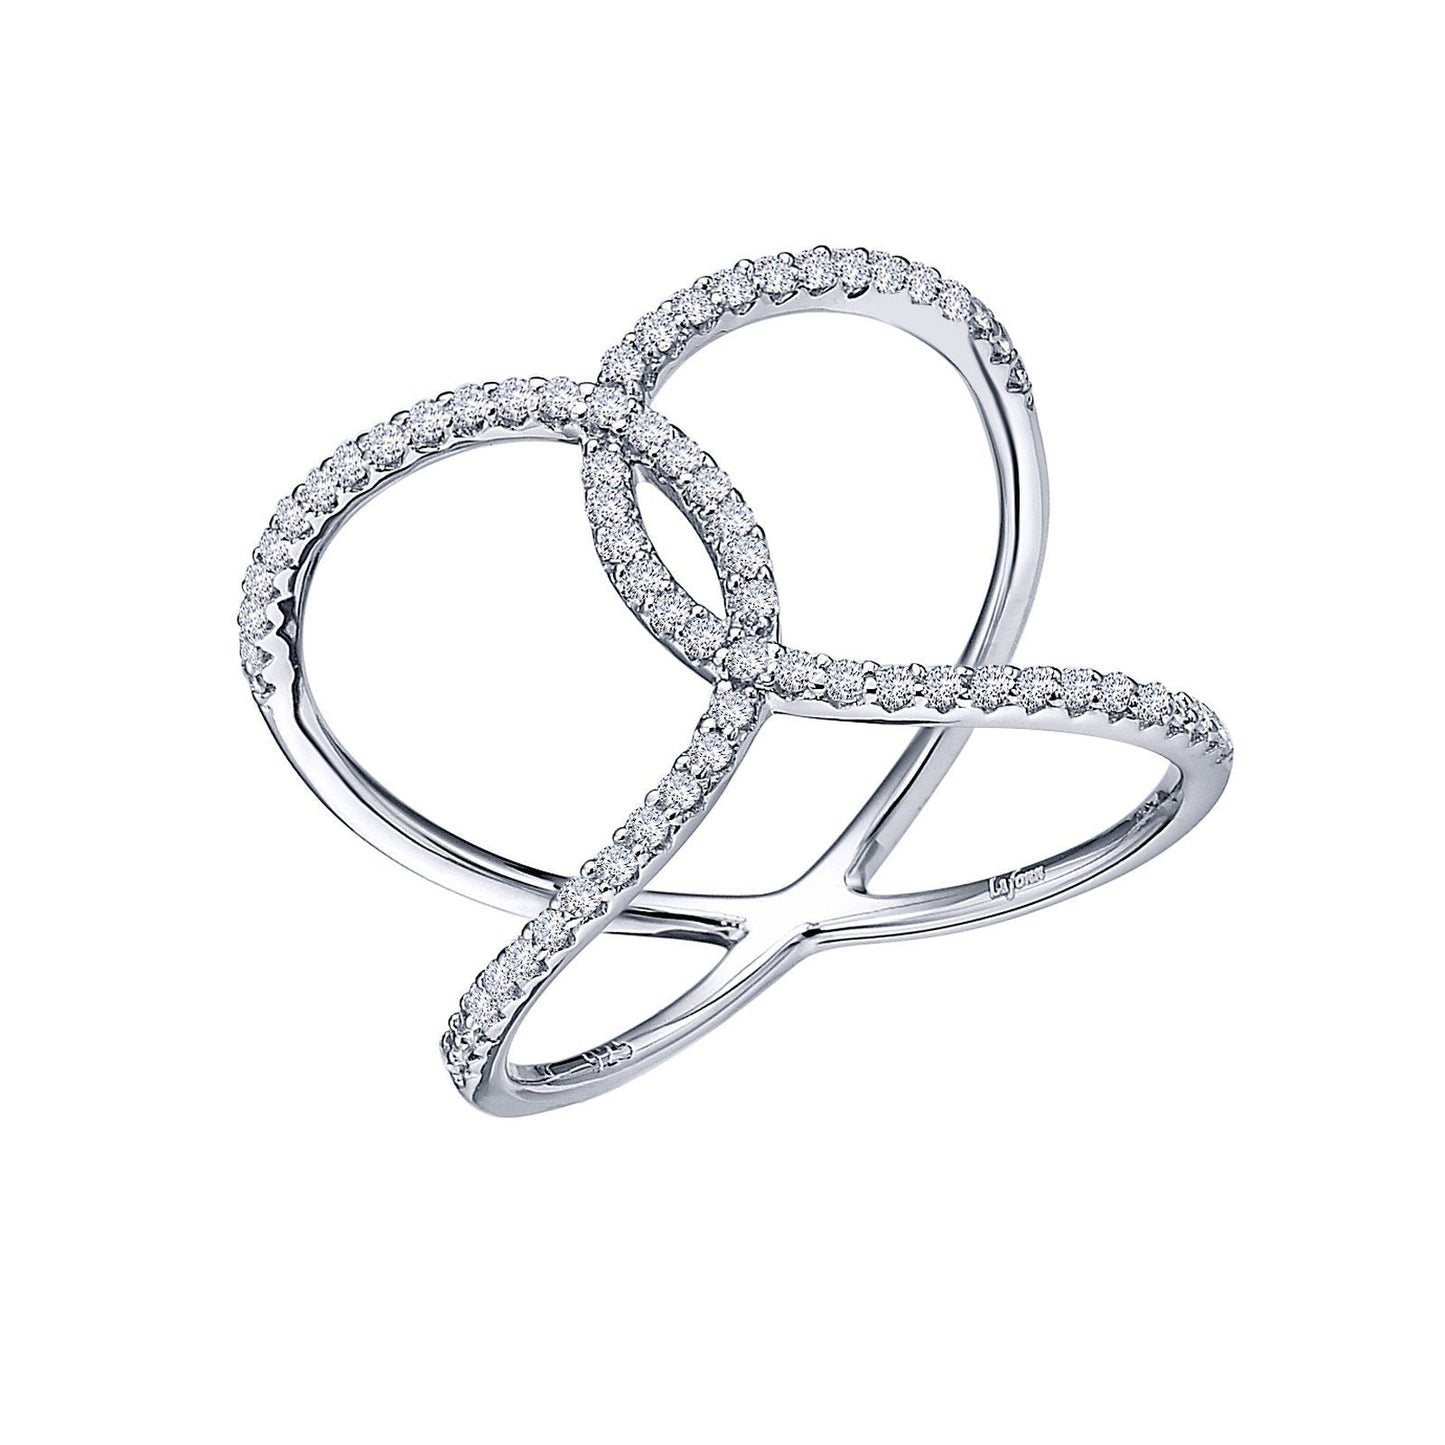 Load image into Gallery viewer, LaFonn Platinum Simulated Diamond N/A RINGS Open Crisscross Ring
